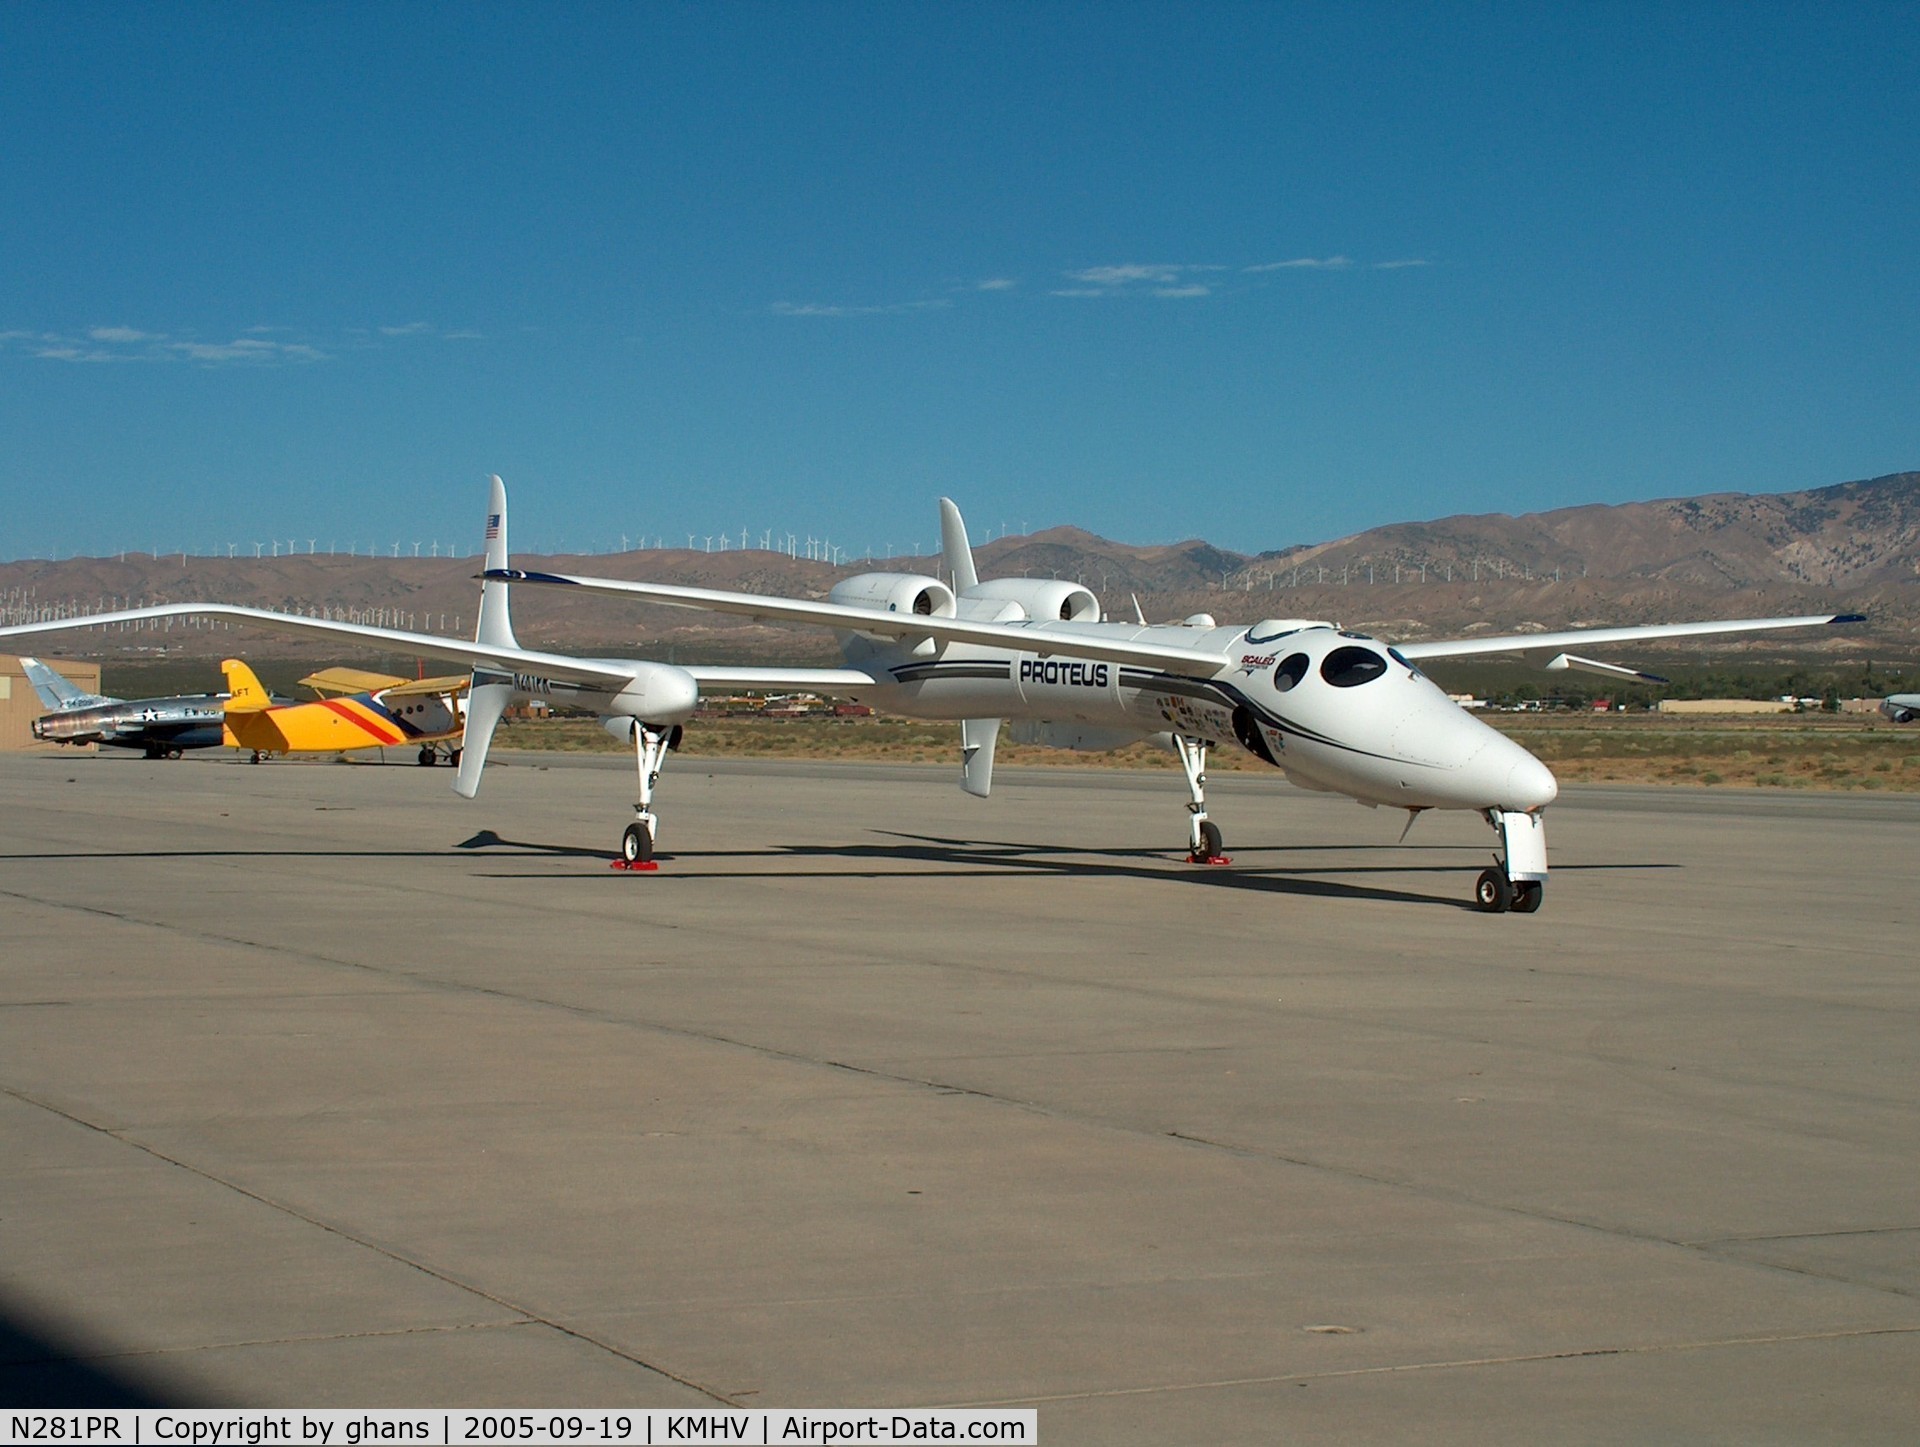 N281PR, 1998 Scaled Composites 281 C/N 001, Another experimental aircraft.